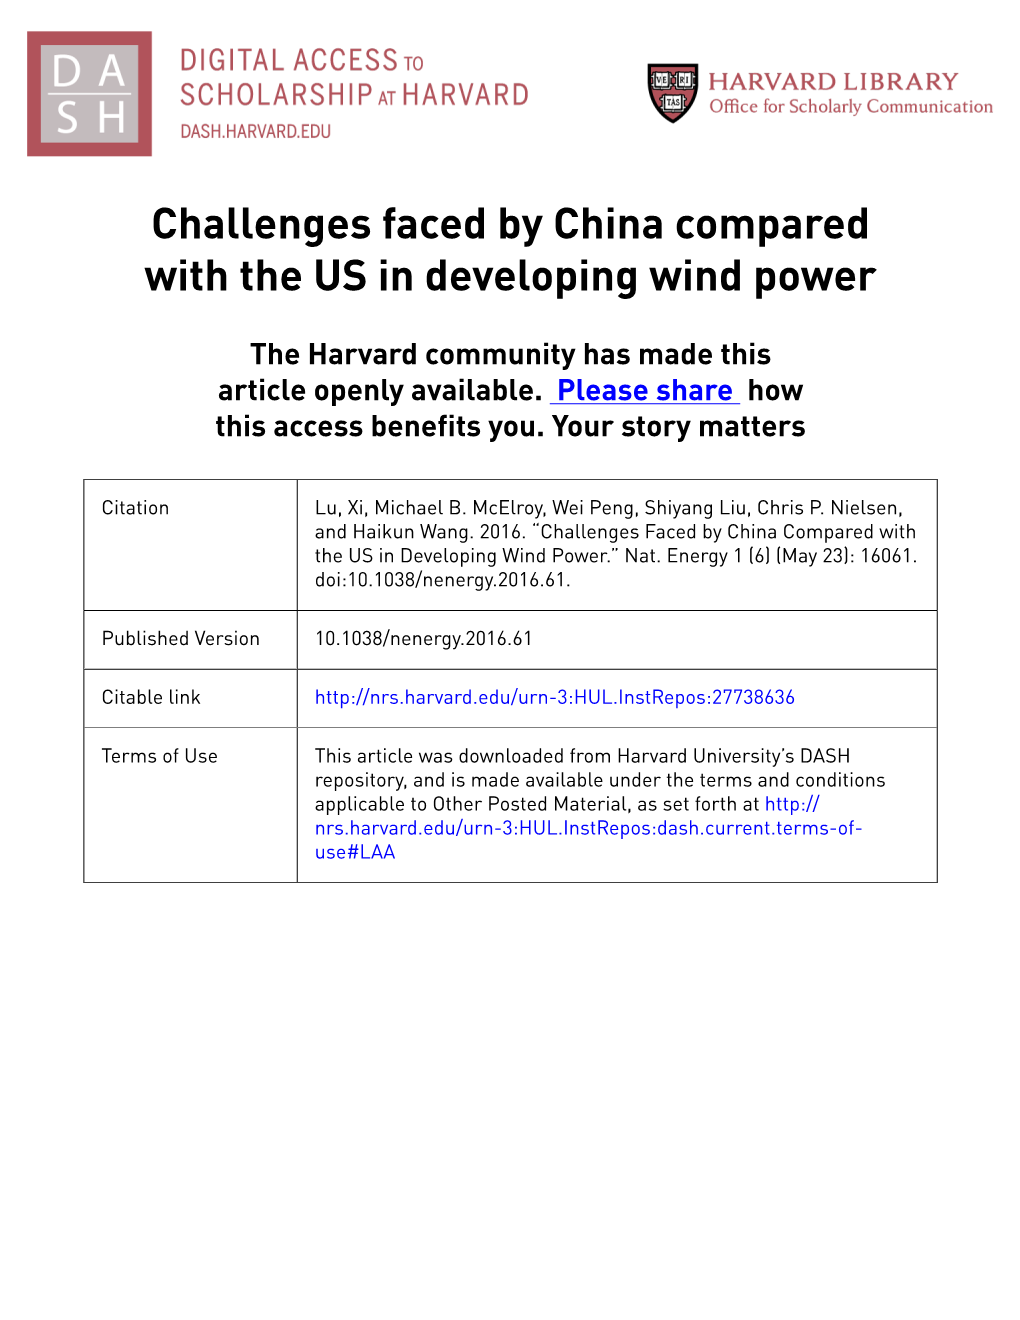 Challenges Faced by China Compared with the US in Developing Wind Power